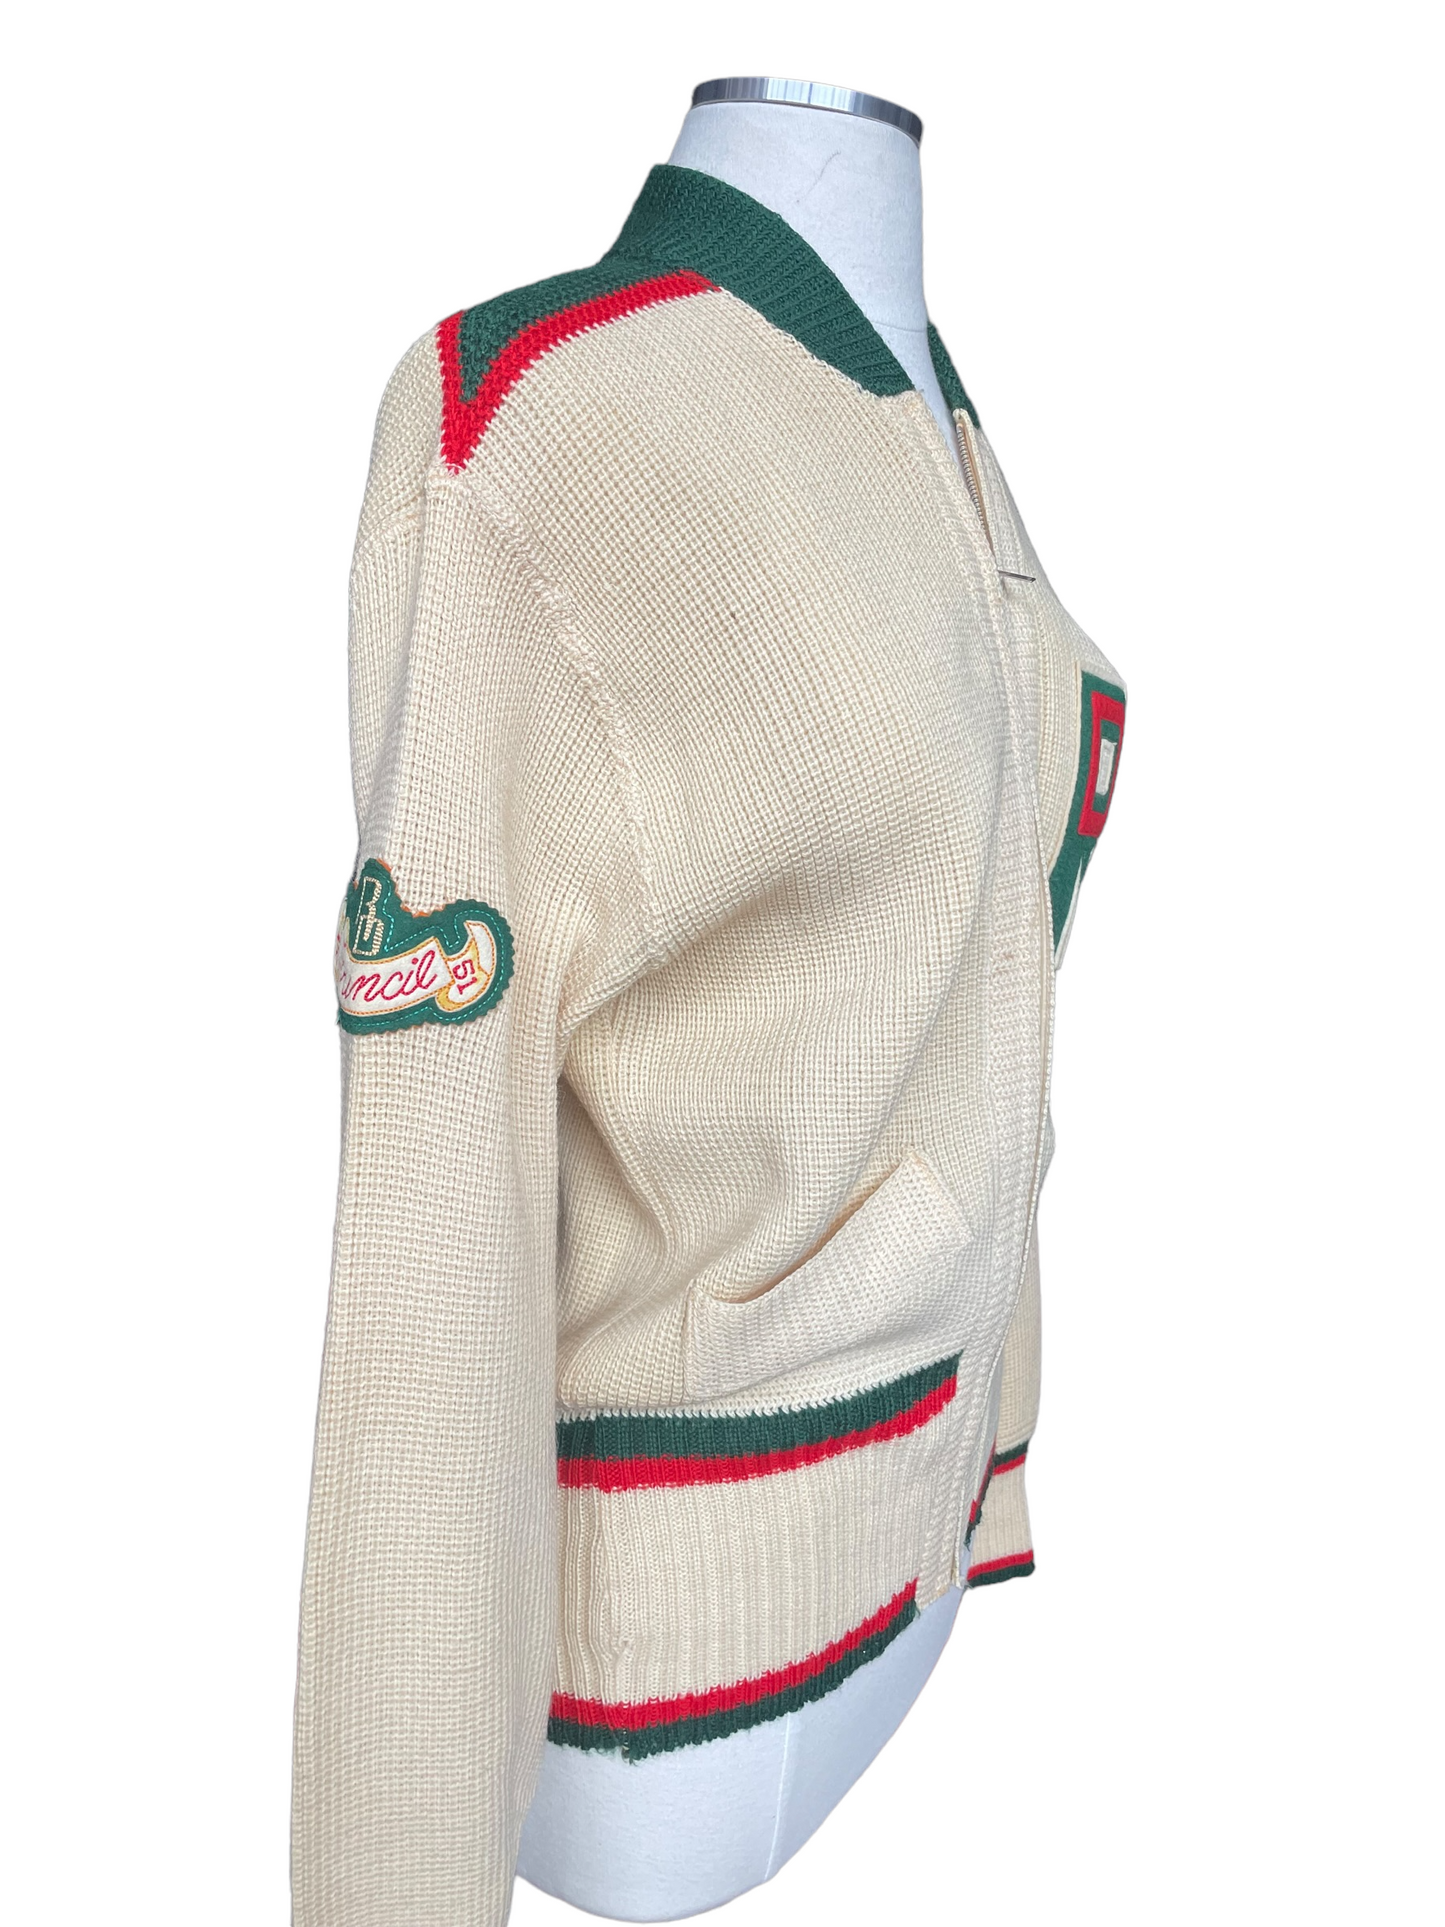 Right Side View of Vintage 1950 Cloverdale Knitting Mills Sweater SZ M | Barn Owl Vintage | Seattle True Vintage Sweaters